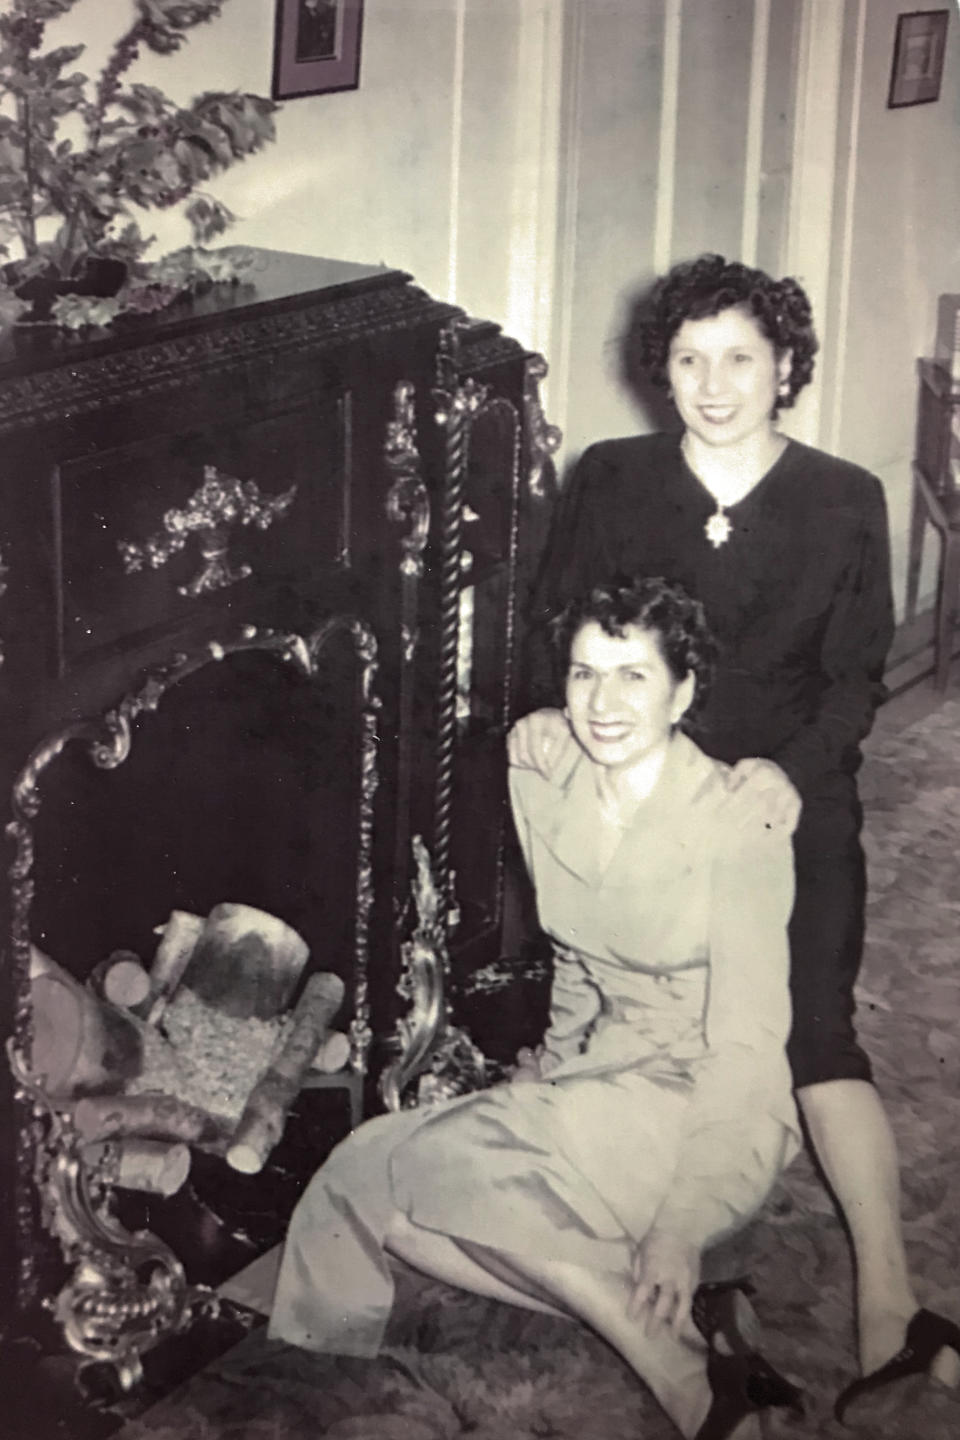 This undated photo provided by her family in May 2020 shows Phyllis Pirro, foreground, and her sister, Mary, in New York. Phyllis Antonetz died of COVID-19 at 103 on April 17, 2020. (Family photo via AP)